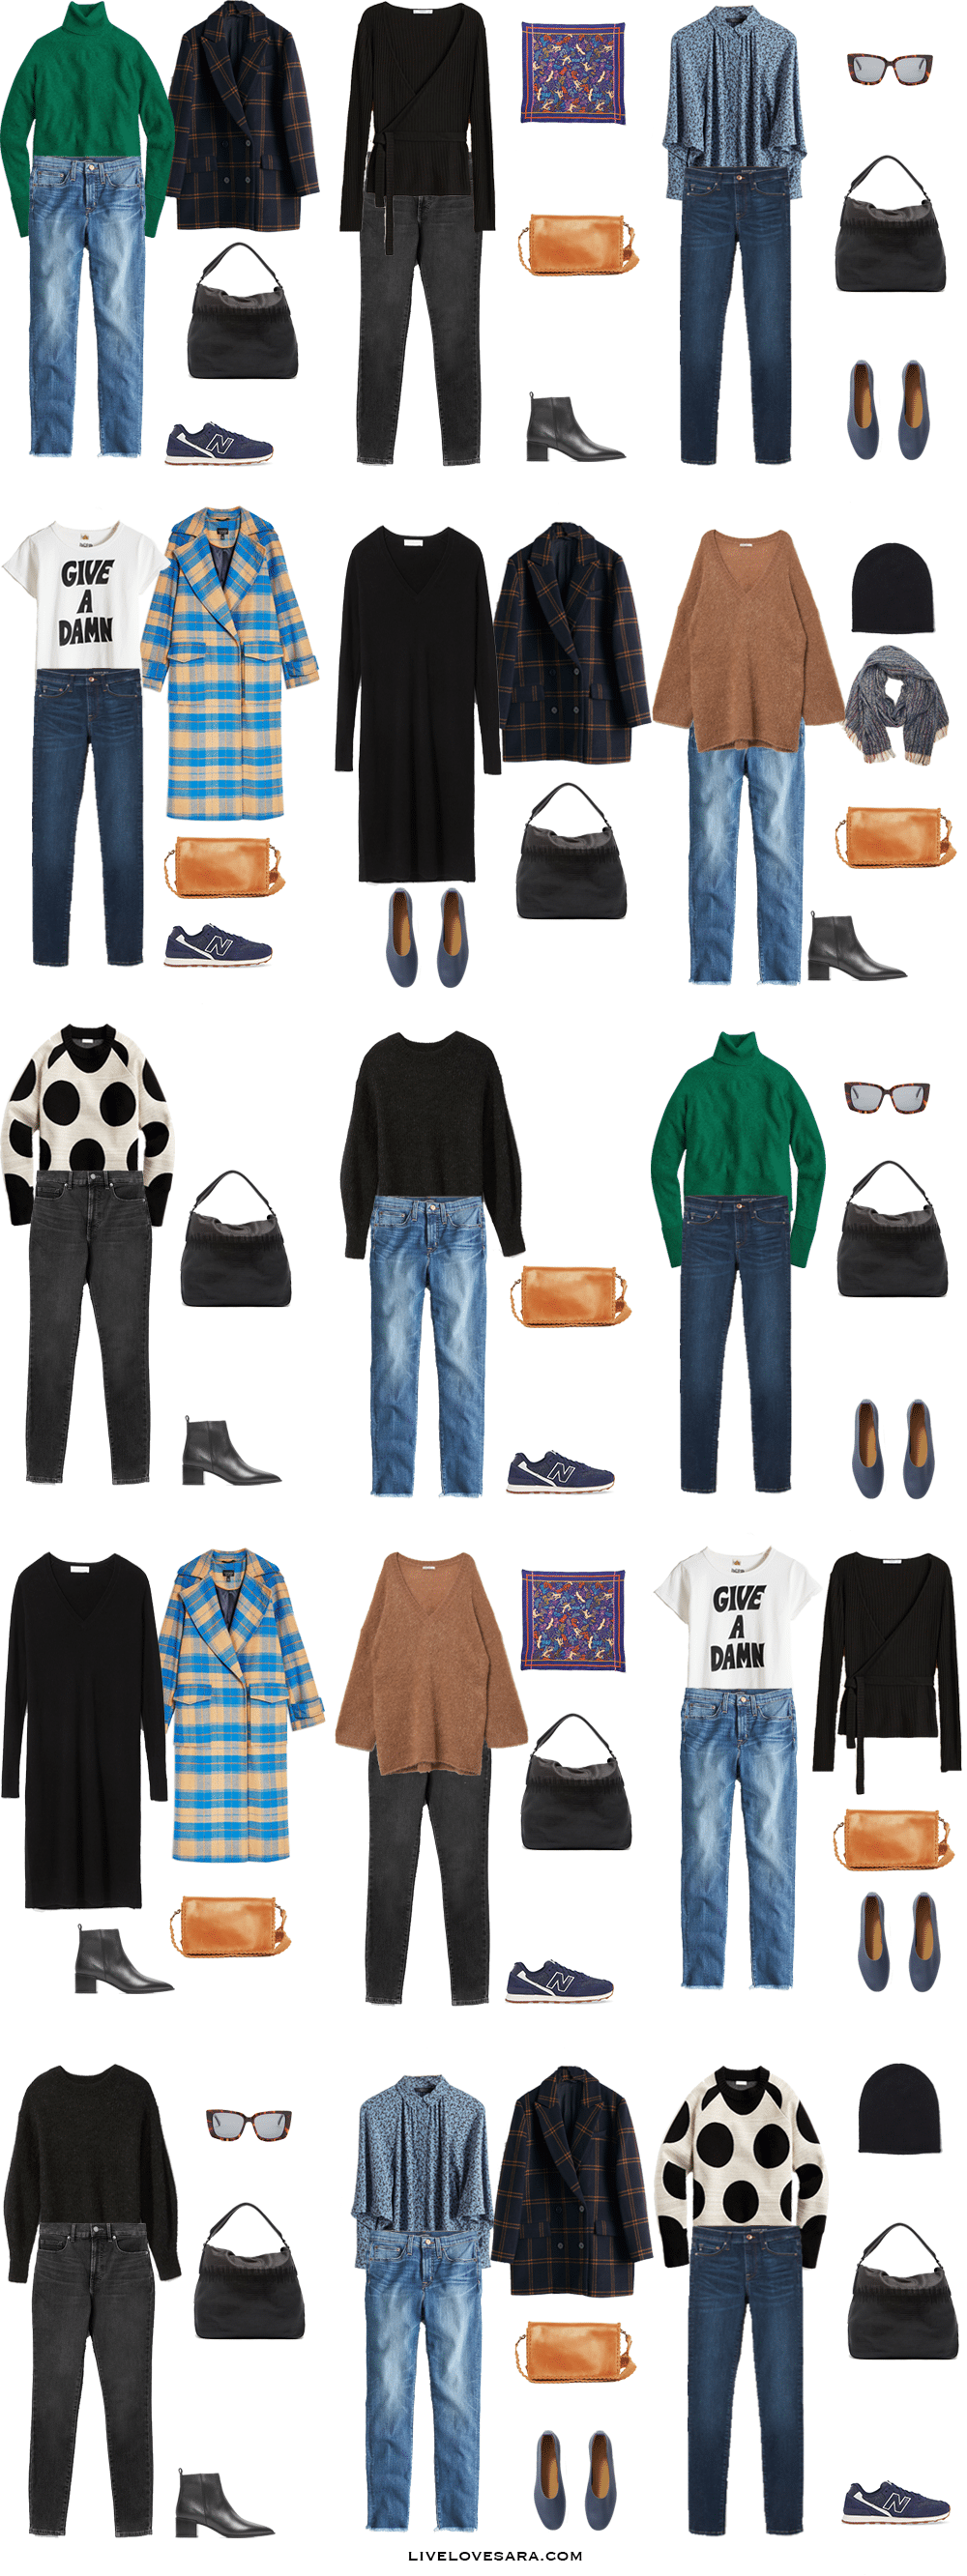 Outfit Ideas for a Genoa, Italy vacation.